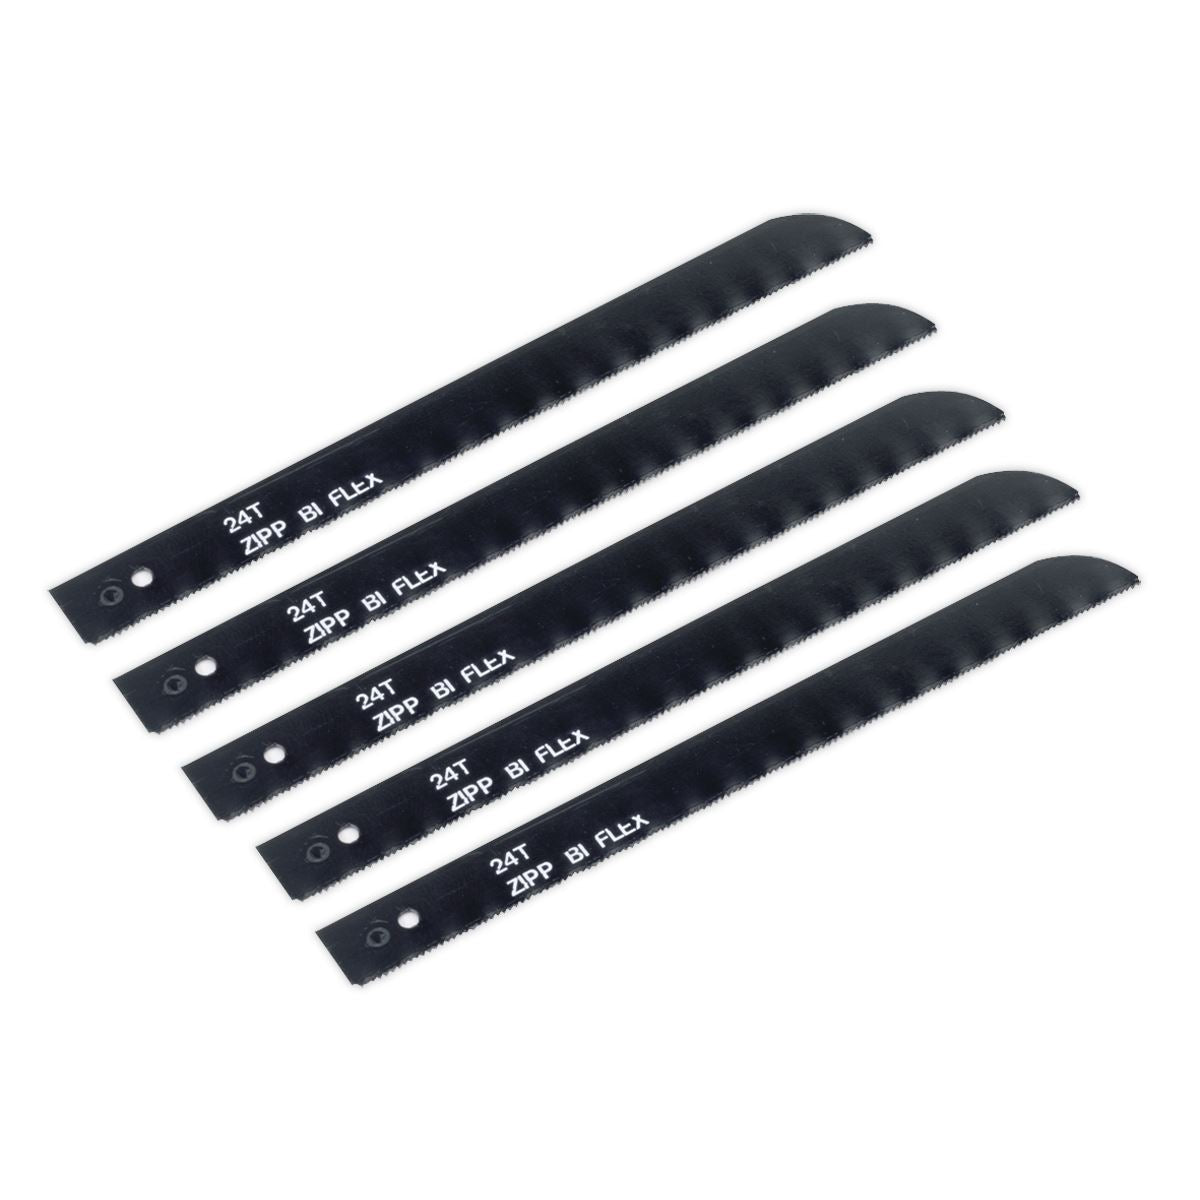 Sealey Air Saw Blade 24tpi Pack of 5